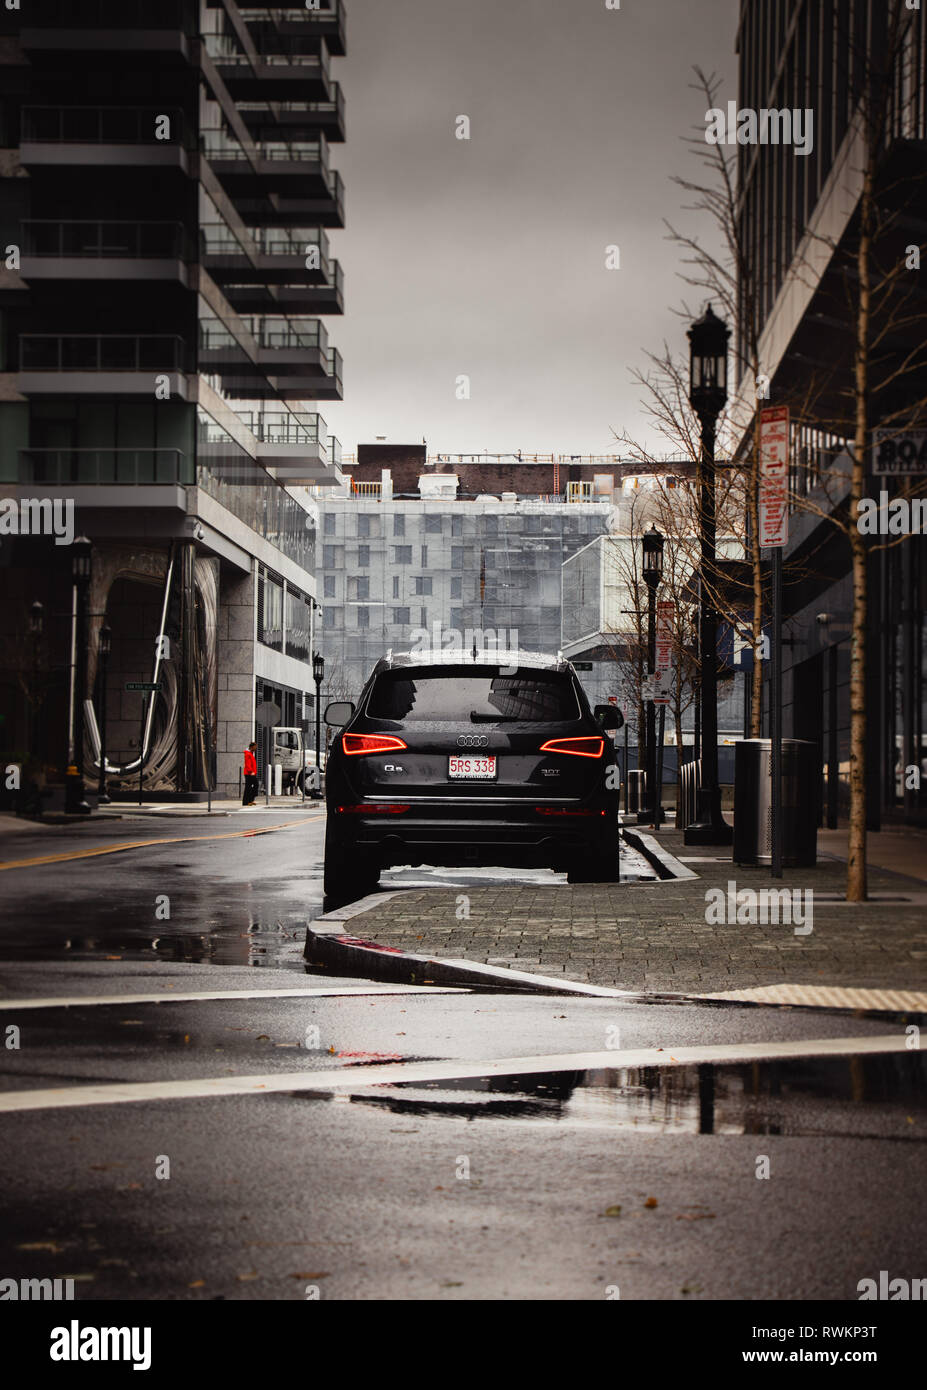 Audi parked in the city on a rainy day Stock Photo